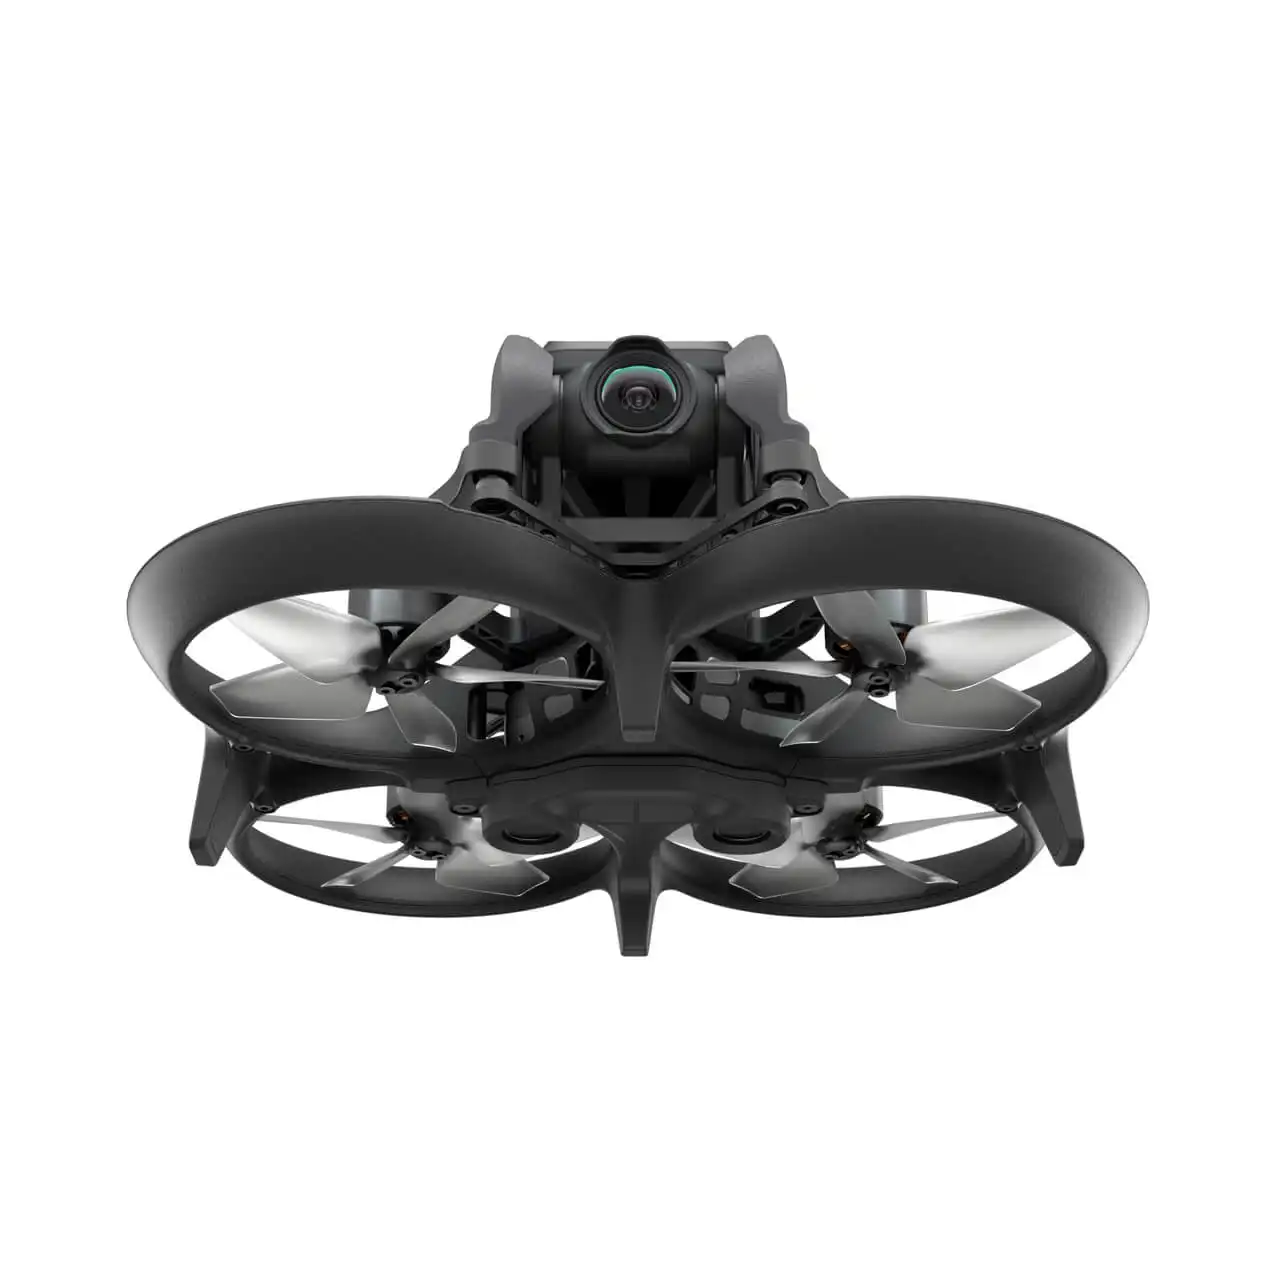 DJI Avata lightweight immersive drone series, available with integrated flight goggles and DJI Goggles 2 options